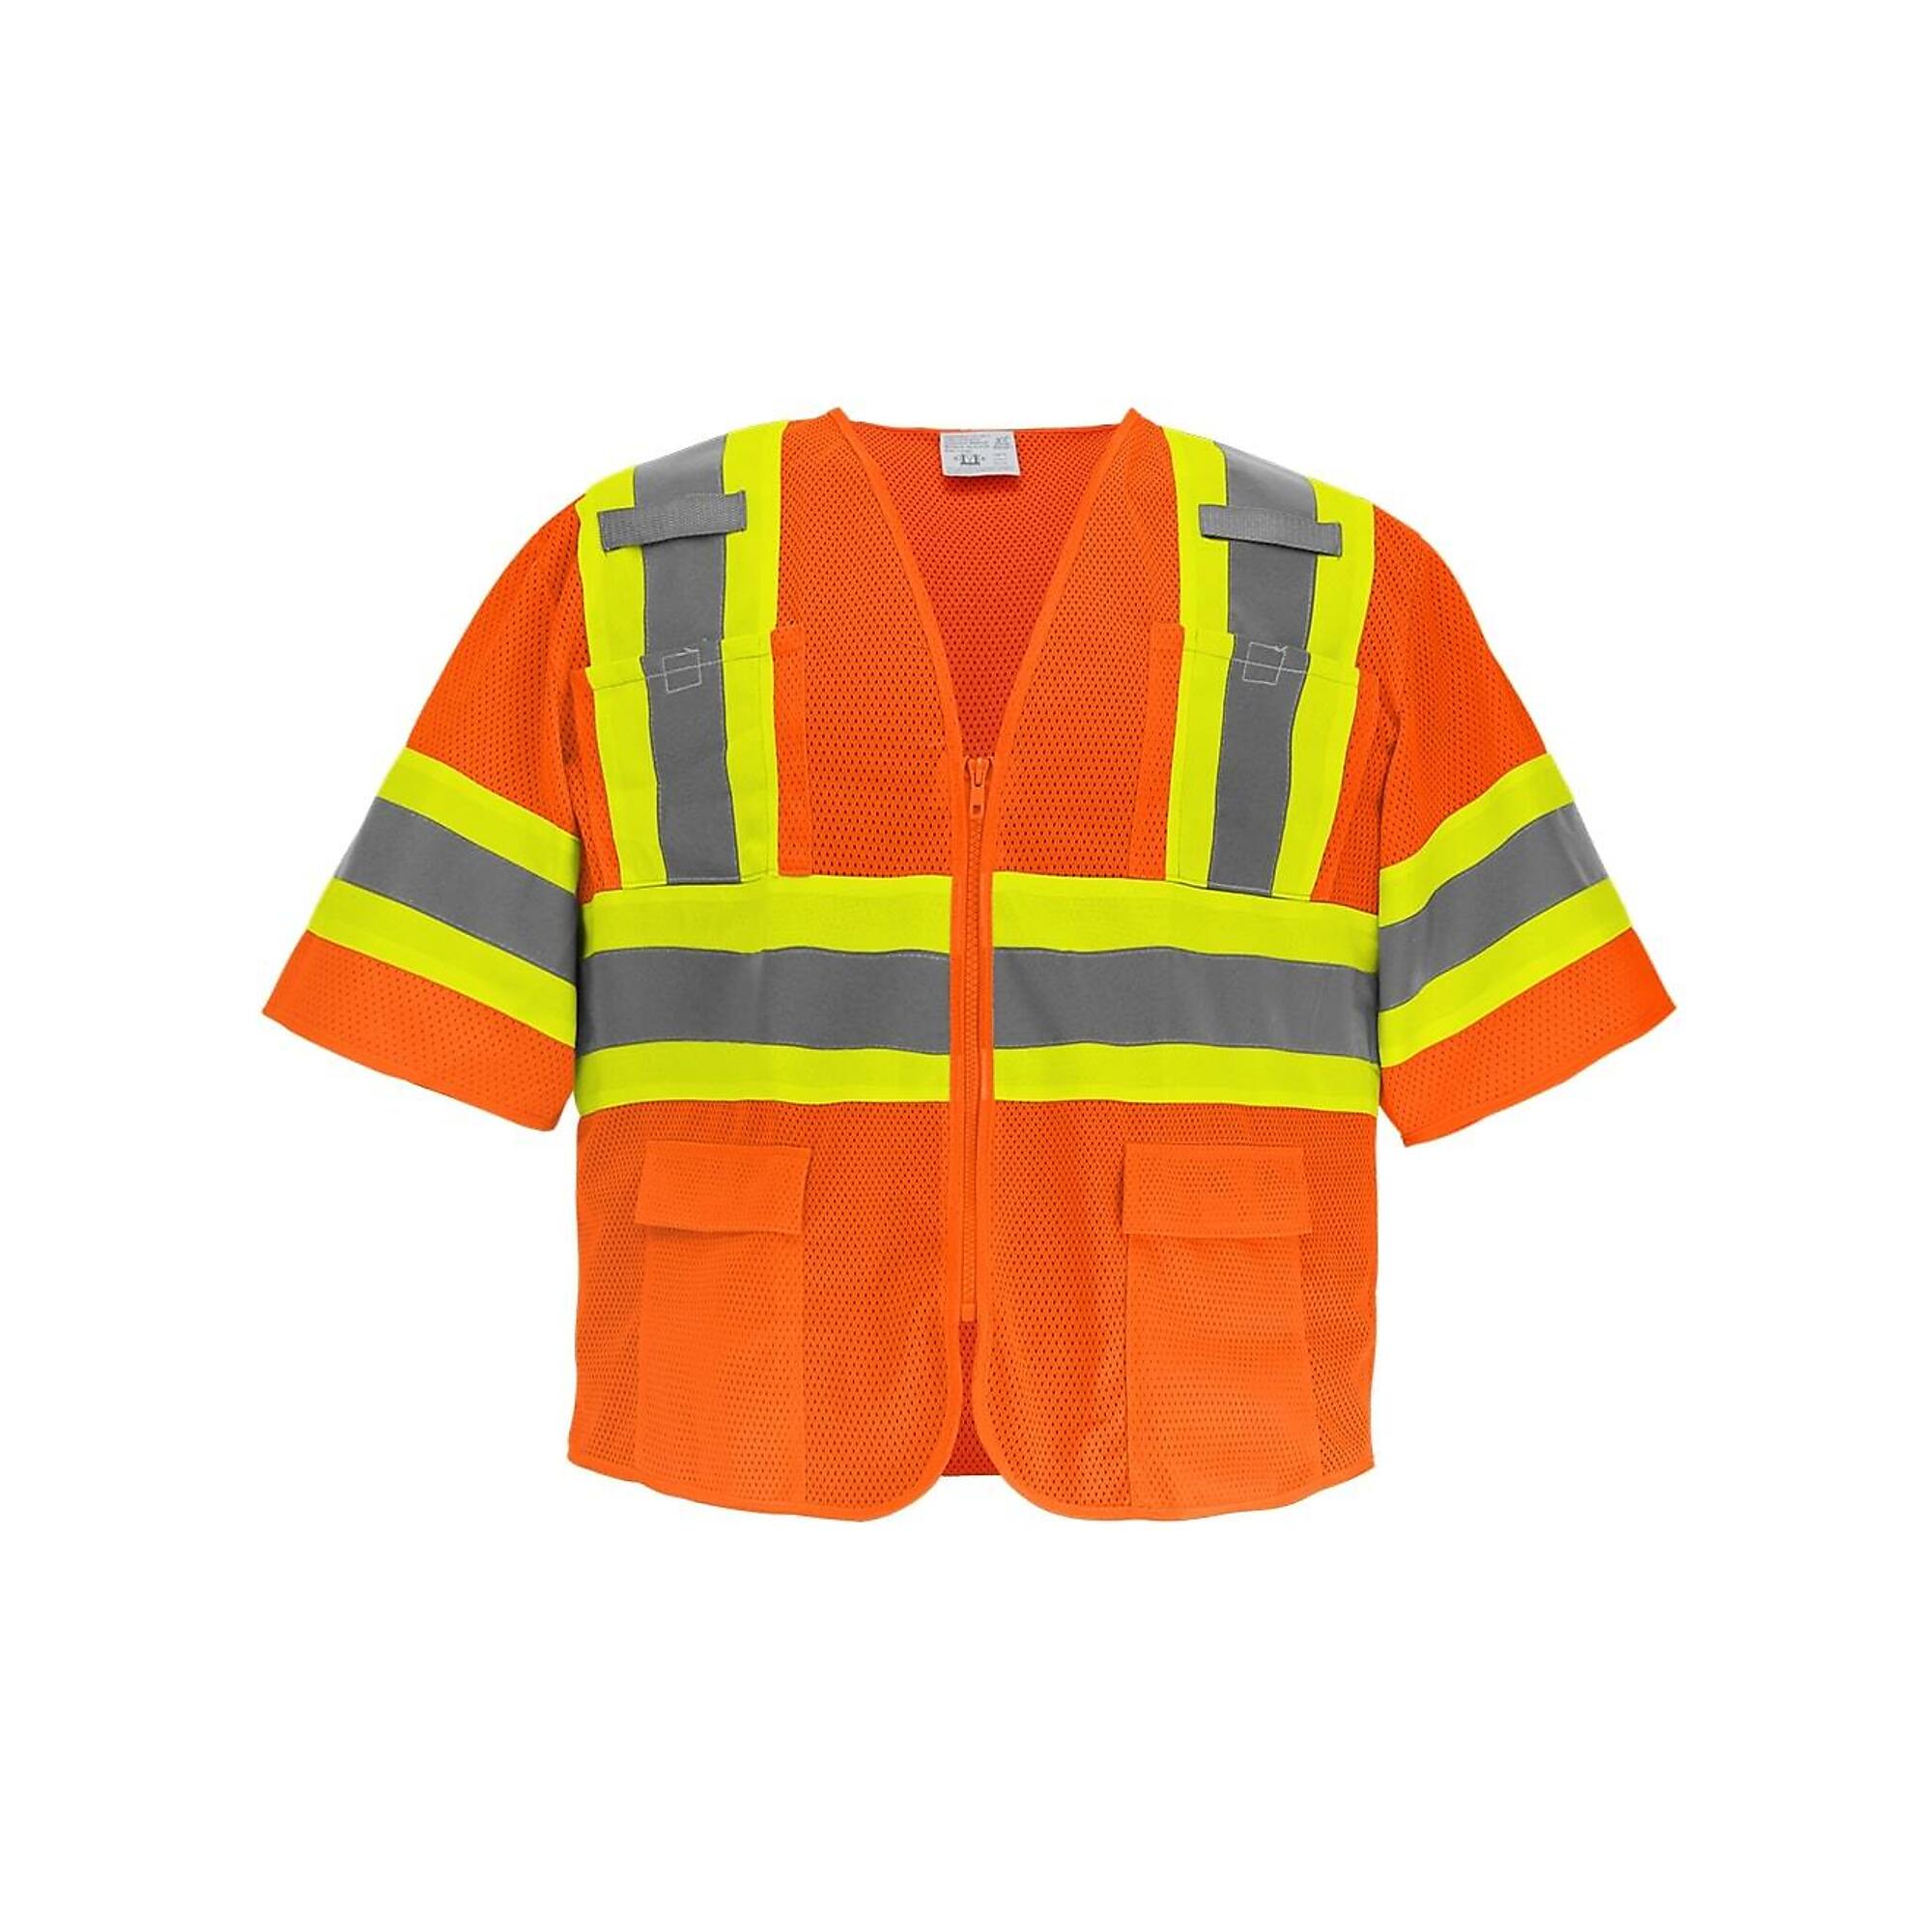 FrogWear, HV Orange, Class 3 6 Pockets, With Sleeves Mesh Vest, Size 5XL, Color High-Visibility Orange, Model GLO-0145-5XL